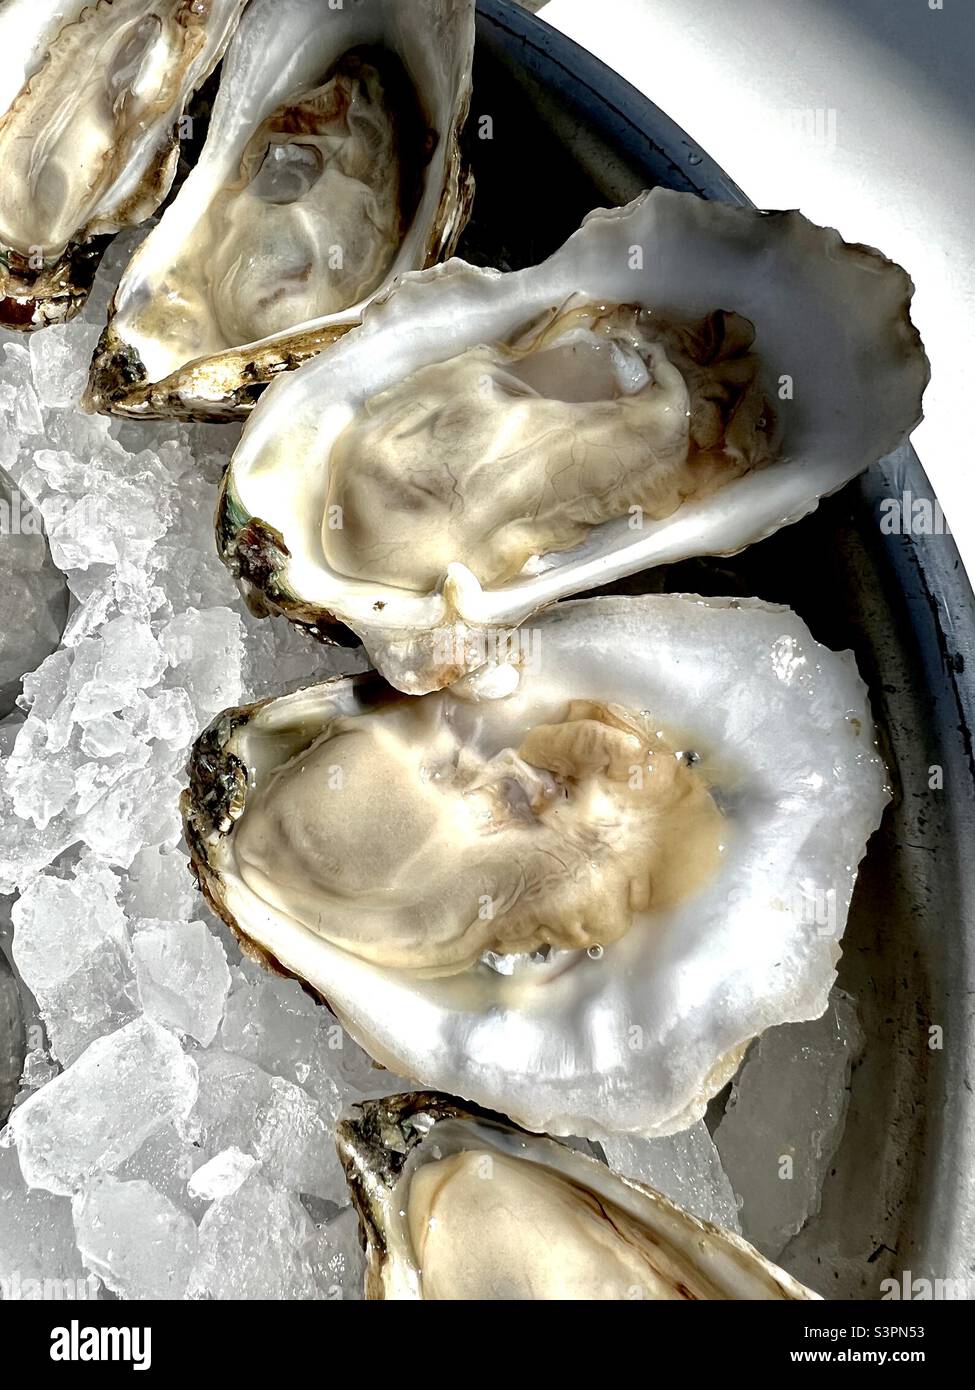 Oysters on the Half shell served on ice Stock Photo